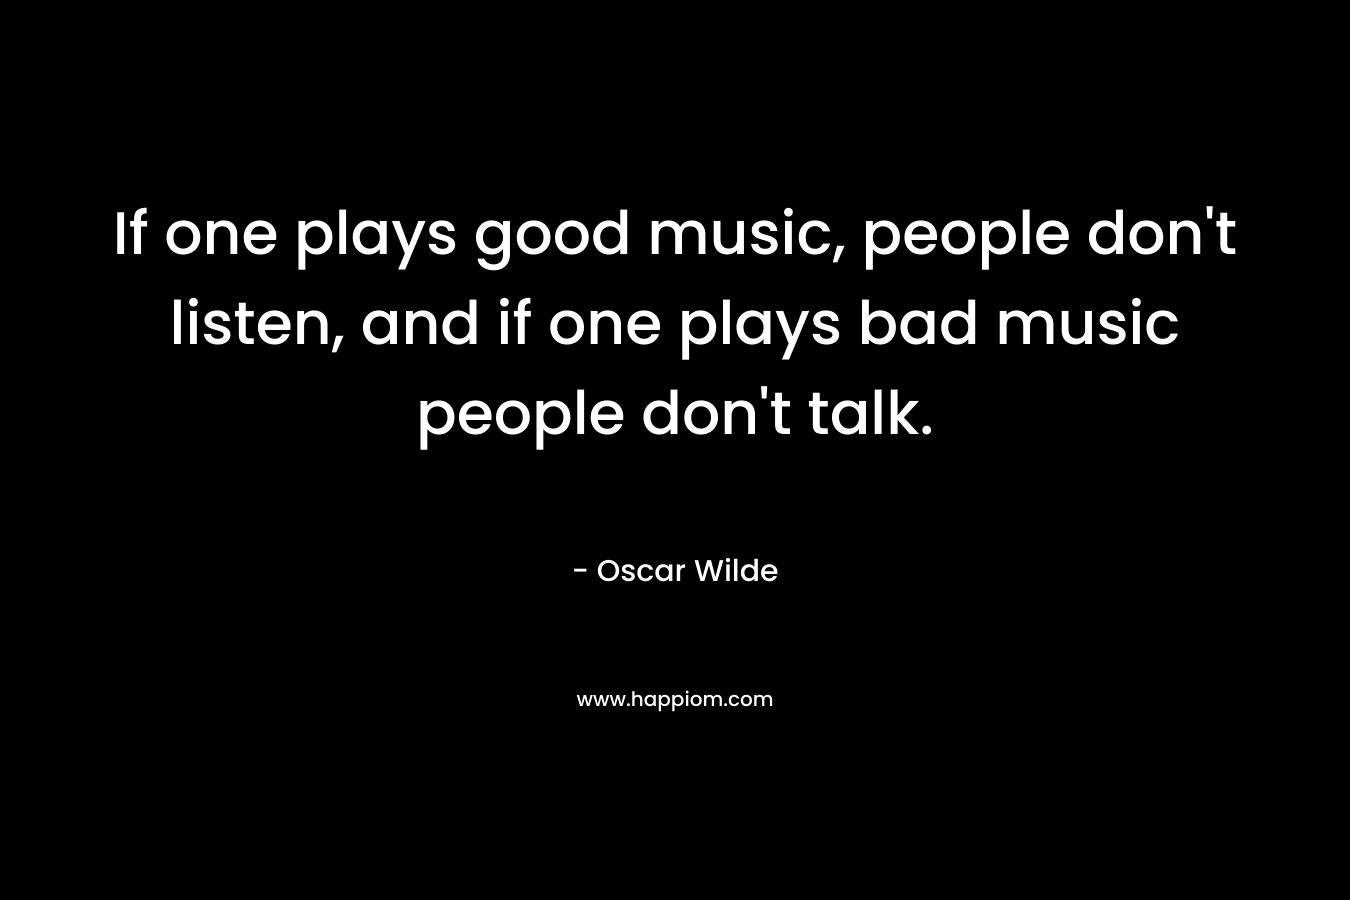 If one plays good music, people don't listen, and if one plays bad music people don't talk.